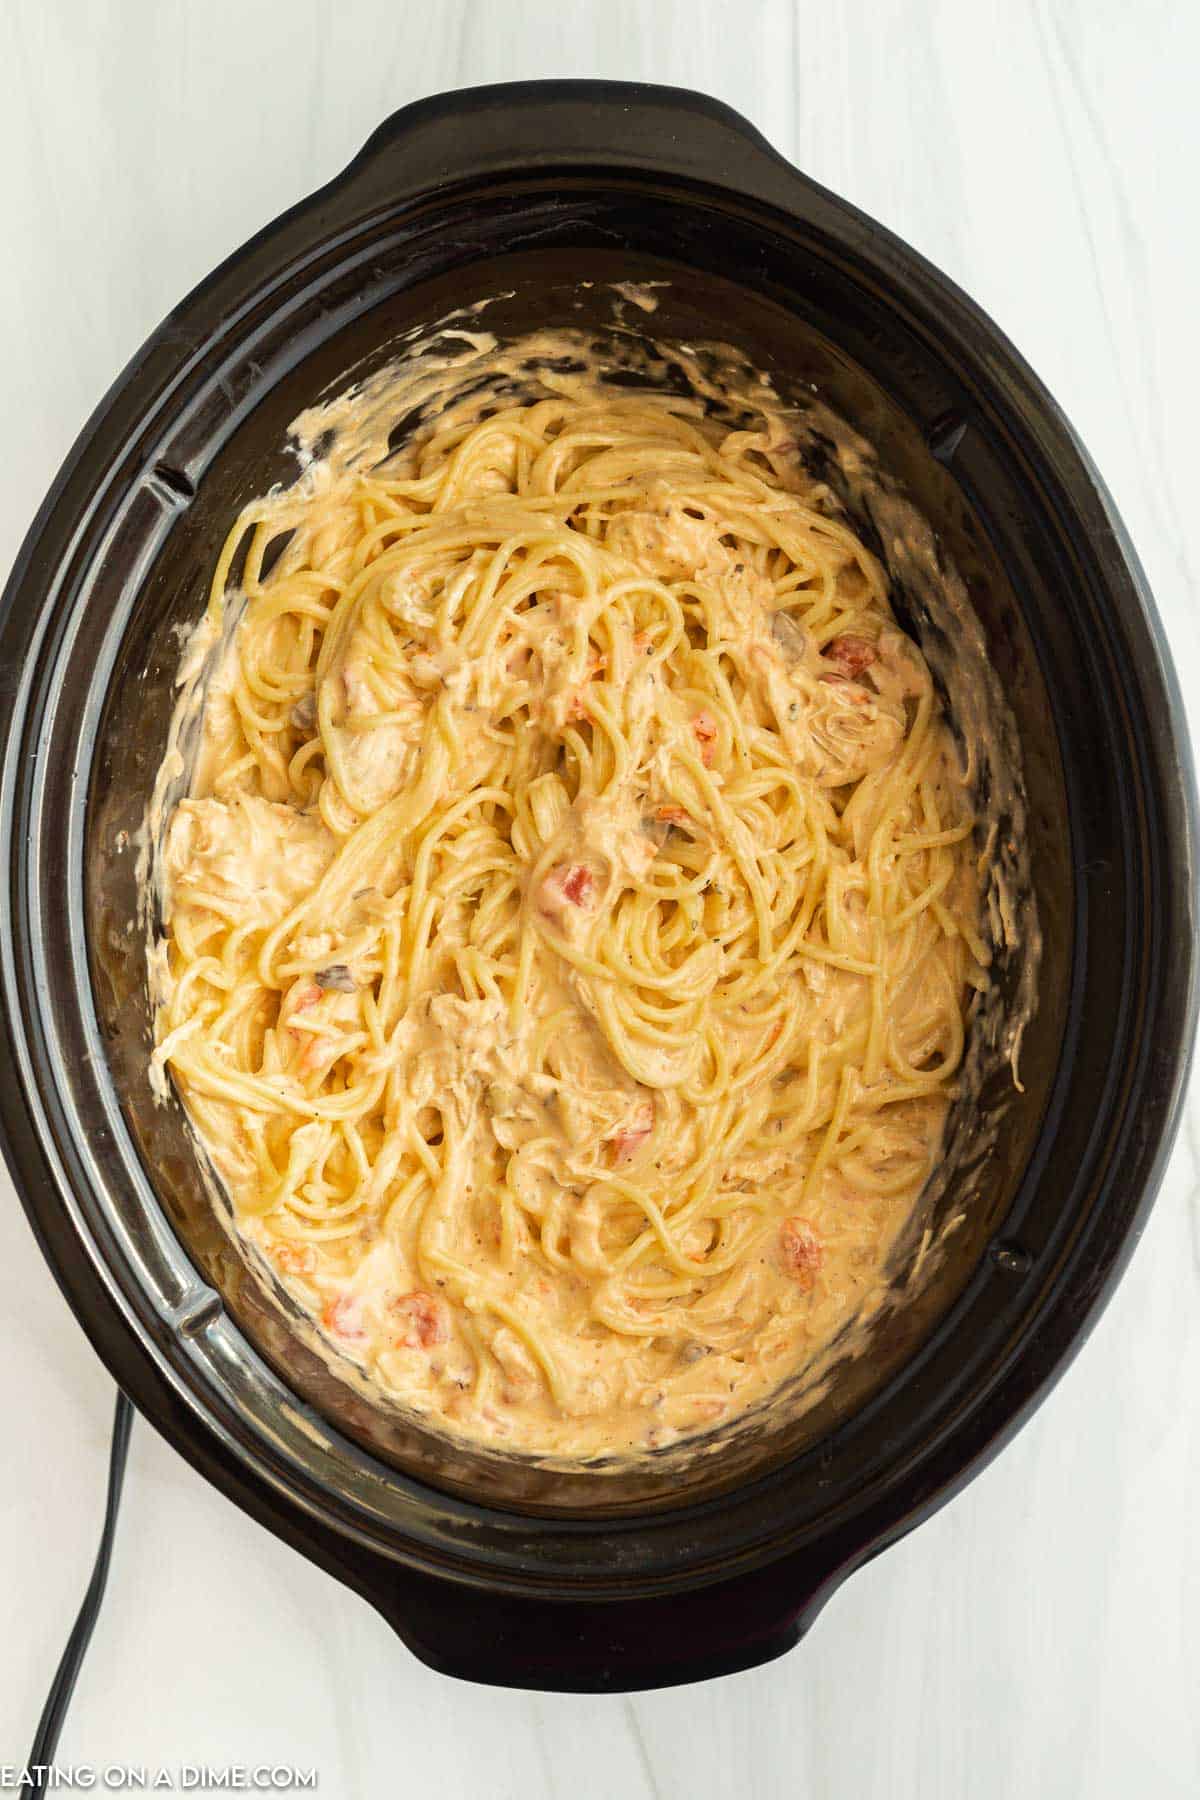 Cooked spaghetti noodles mixed in with the chicken mixture in the slow cooker